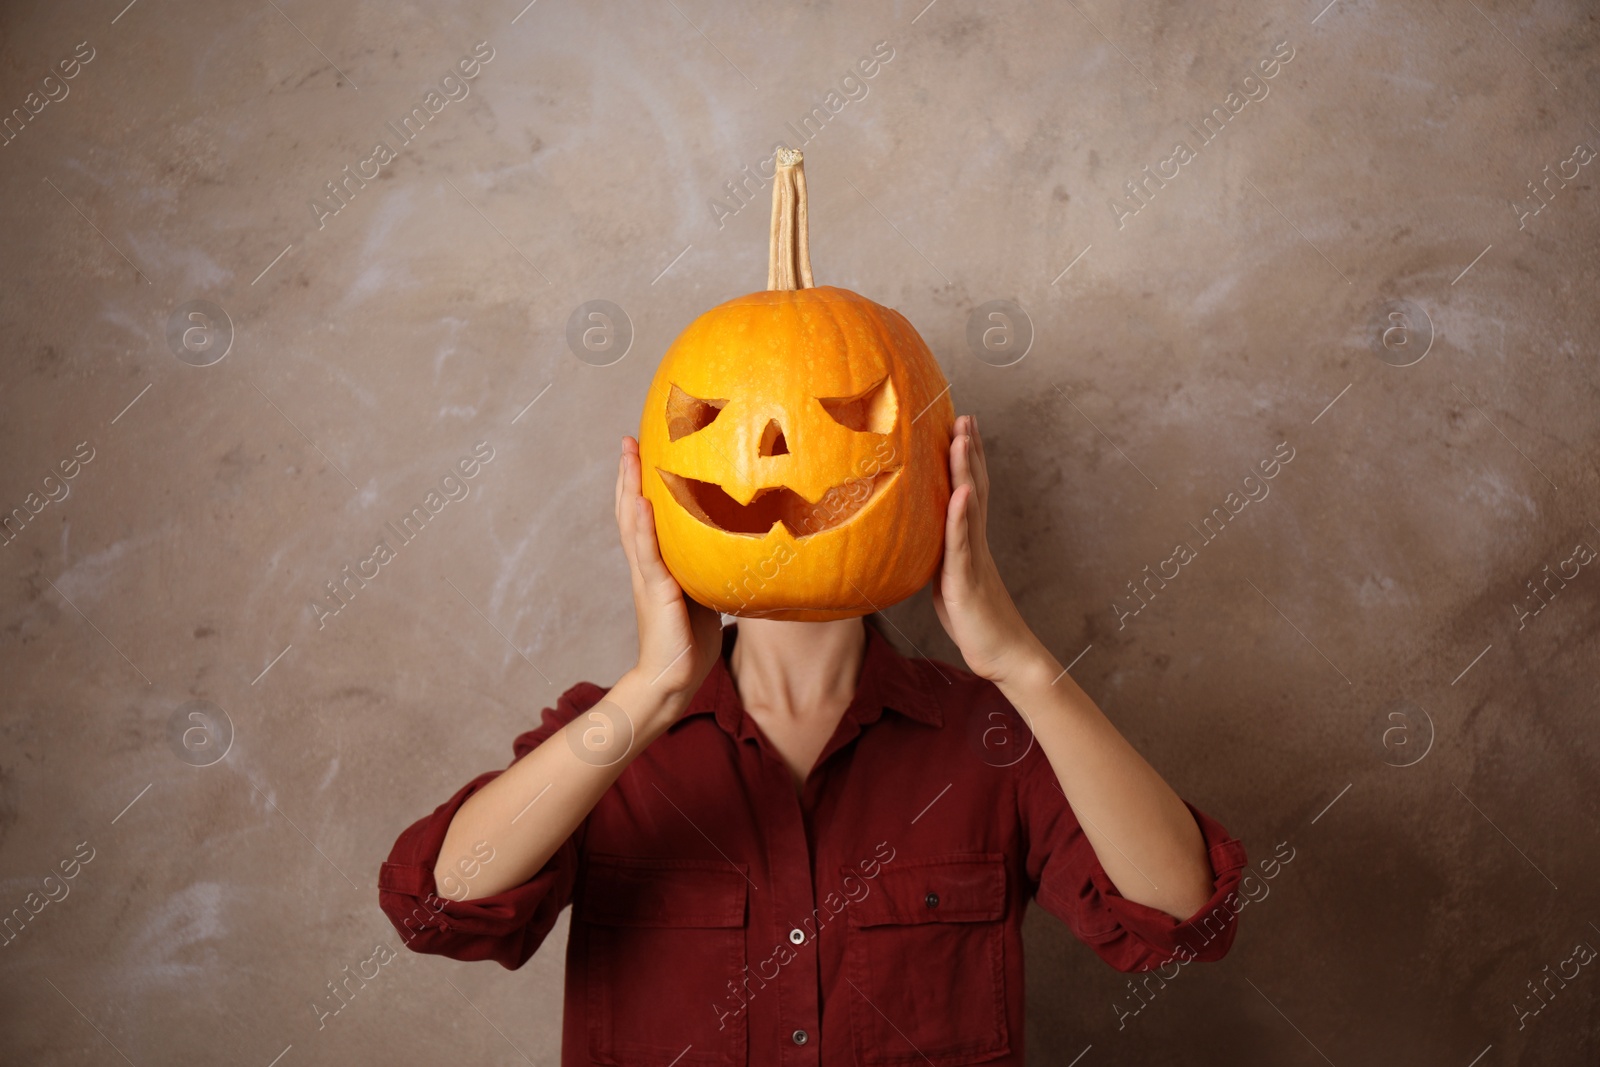 Photo of Woman with pumpkin head against beige background. Jack lantern - traditional Halloween decor